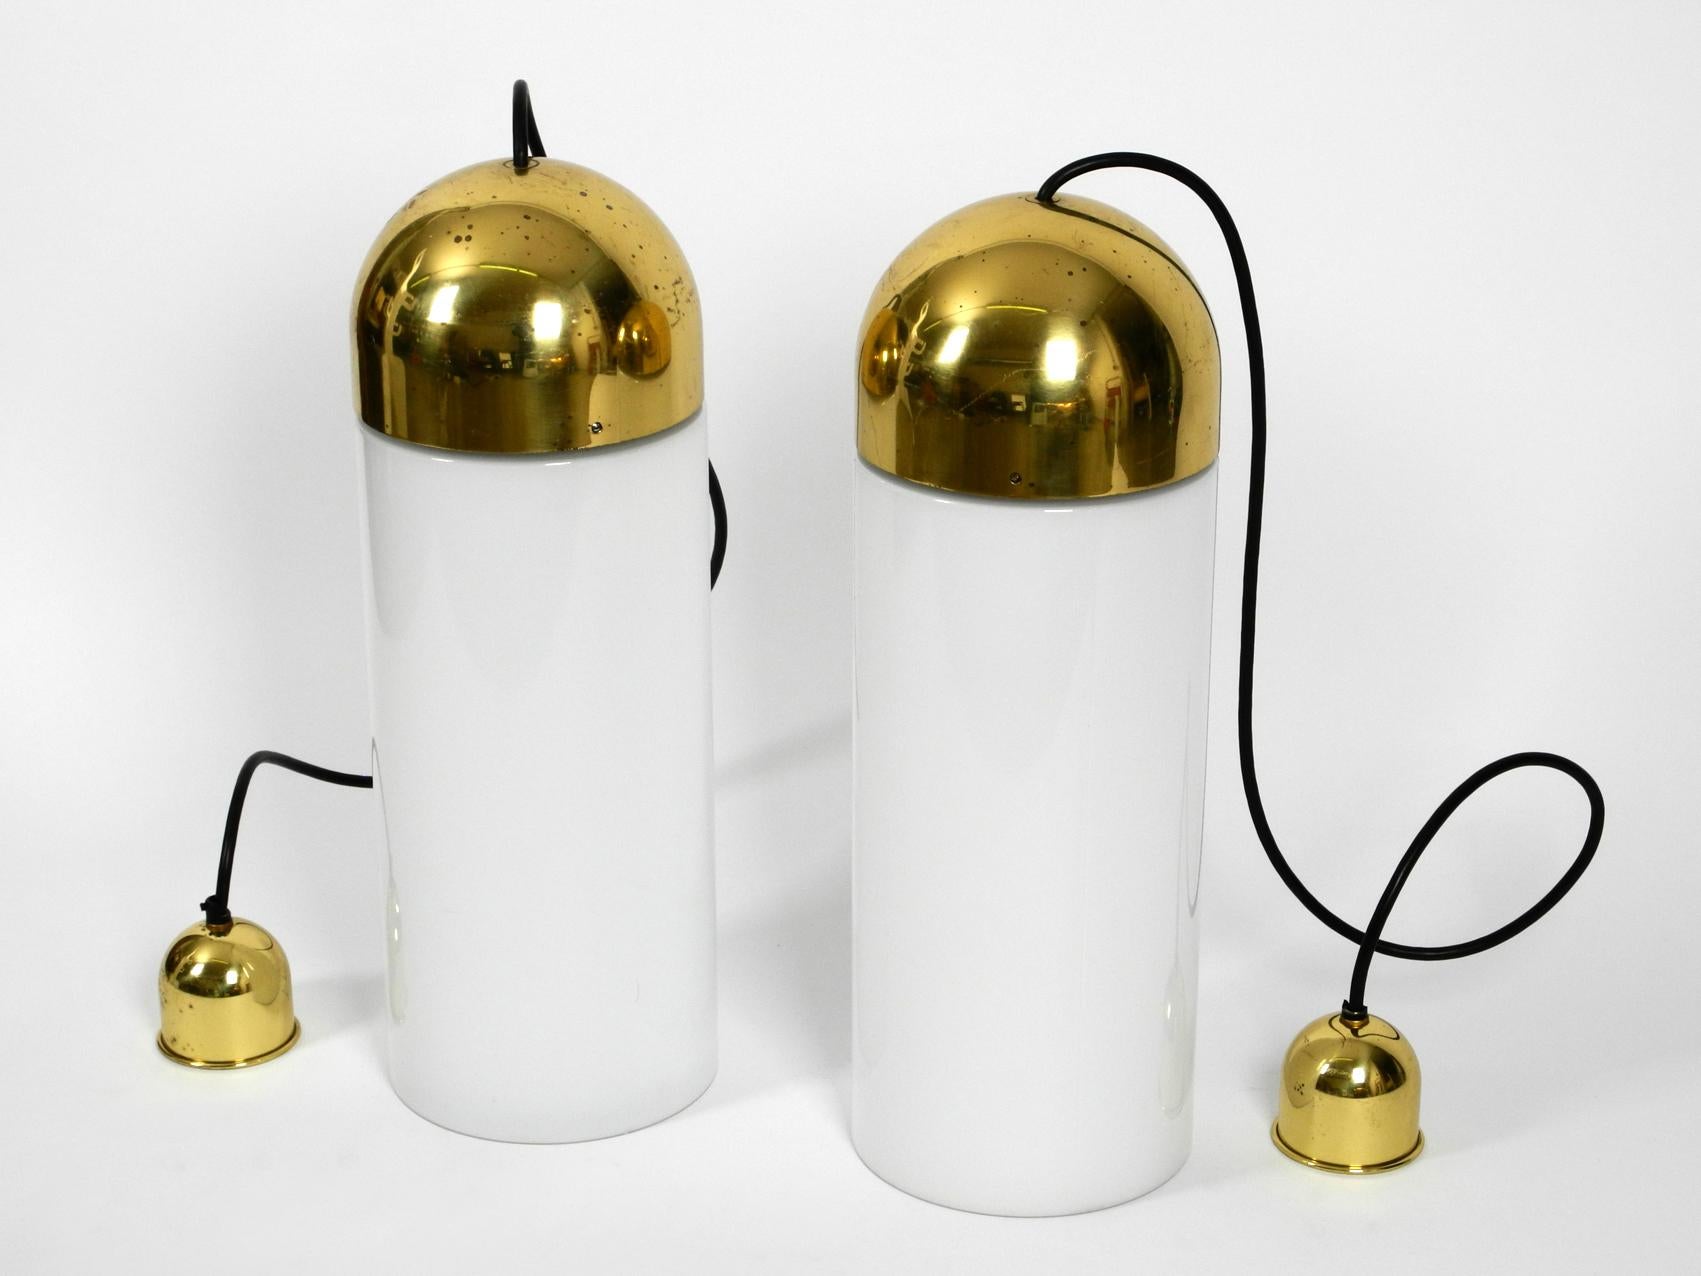 Pair of very rare extra-large glass church lamps with brass tops. Made by Limburg in the 1980s.
Made in Germany. Very good condition. The brass domes have some patina and 2-3 slight bumps.
A glass has a chipping on the thread. You no longer see